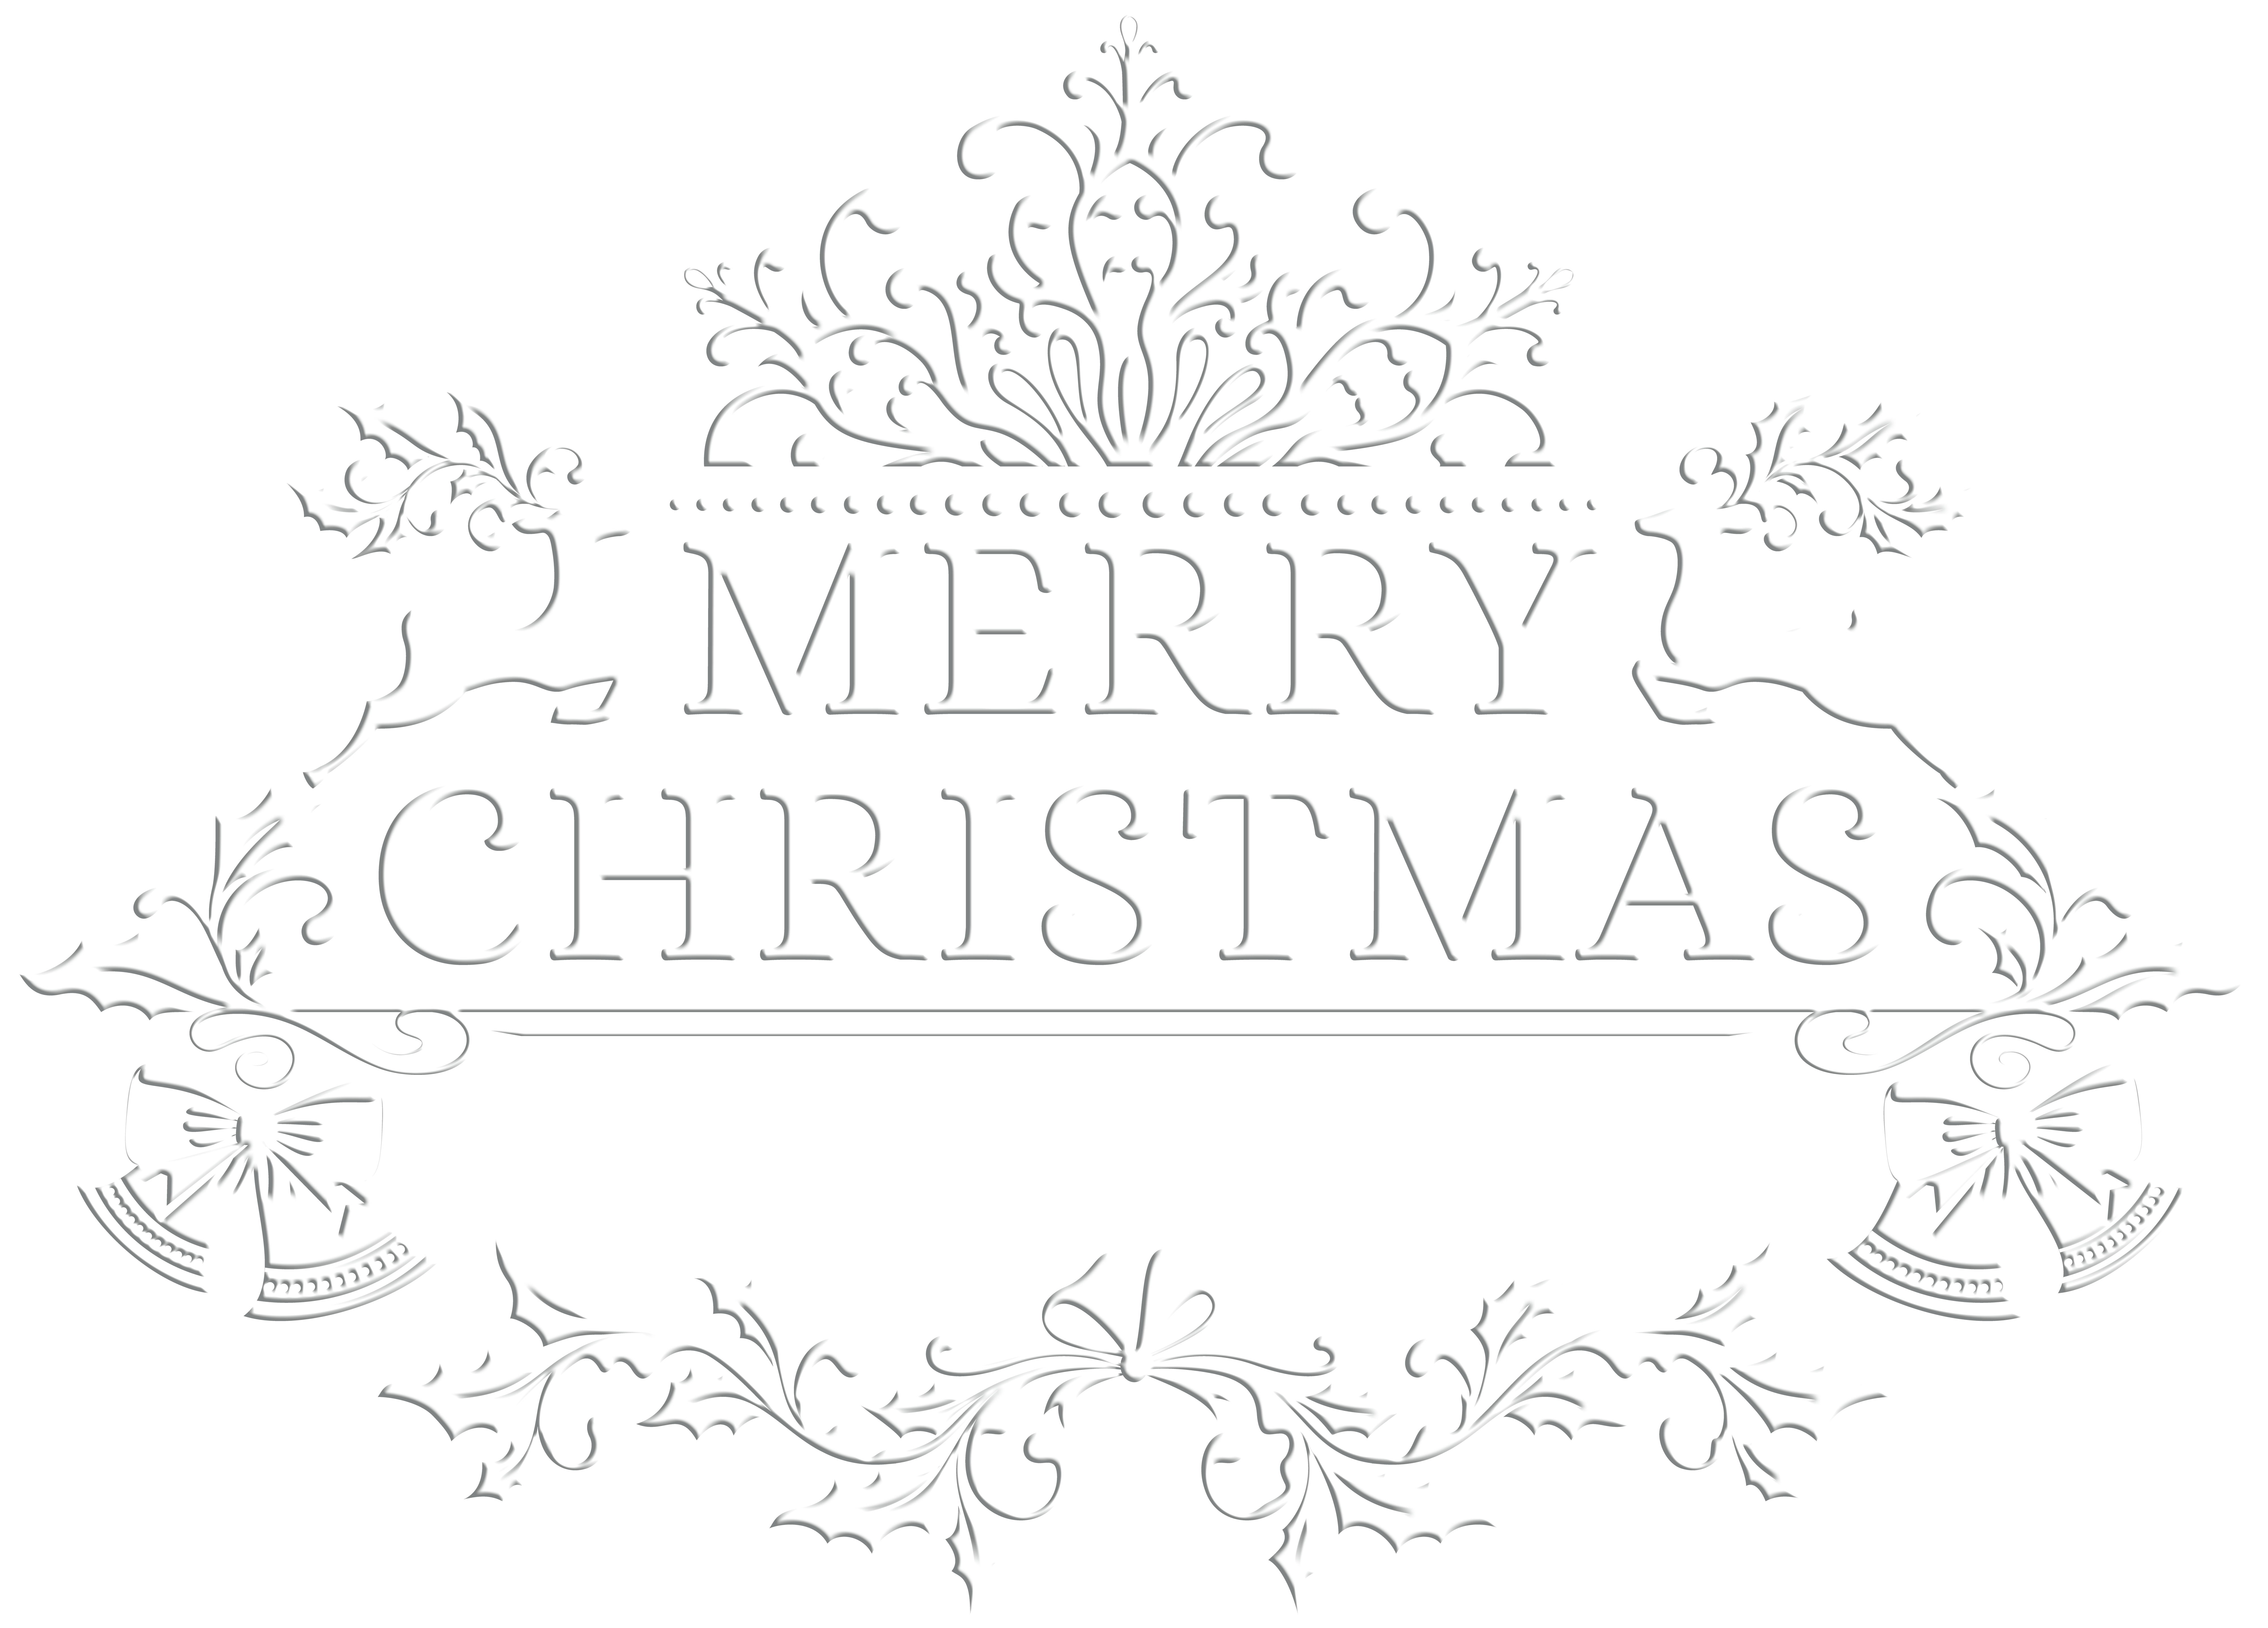 Download Merry Christmas White Transparent Png Clip Art Image Gallery Yopriceville High Quality Images And Transparent Png Free Clipart